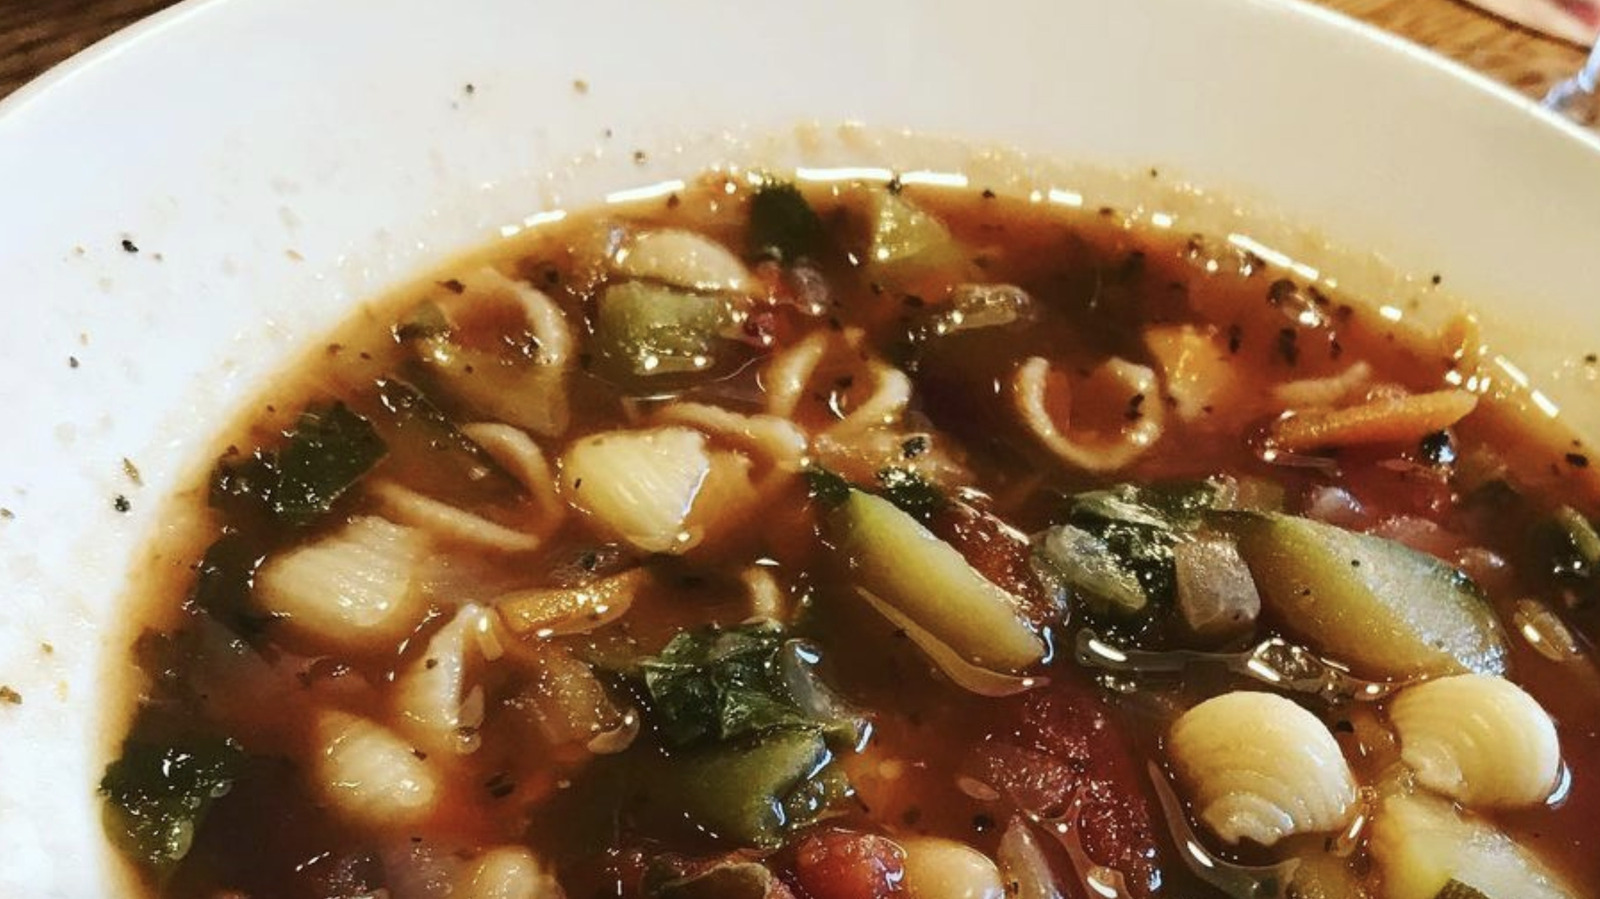 26+ How many carbs in minestrone soup at olive garden information